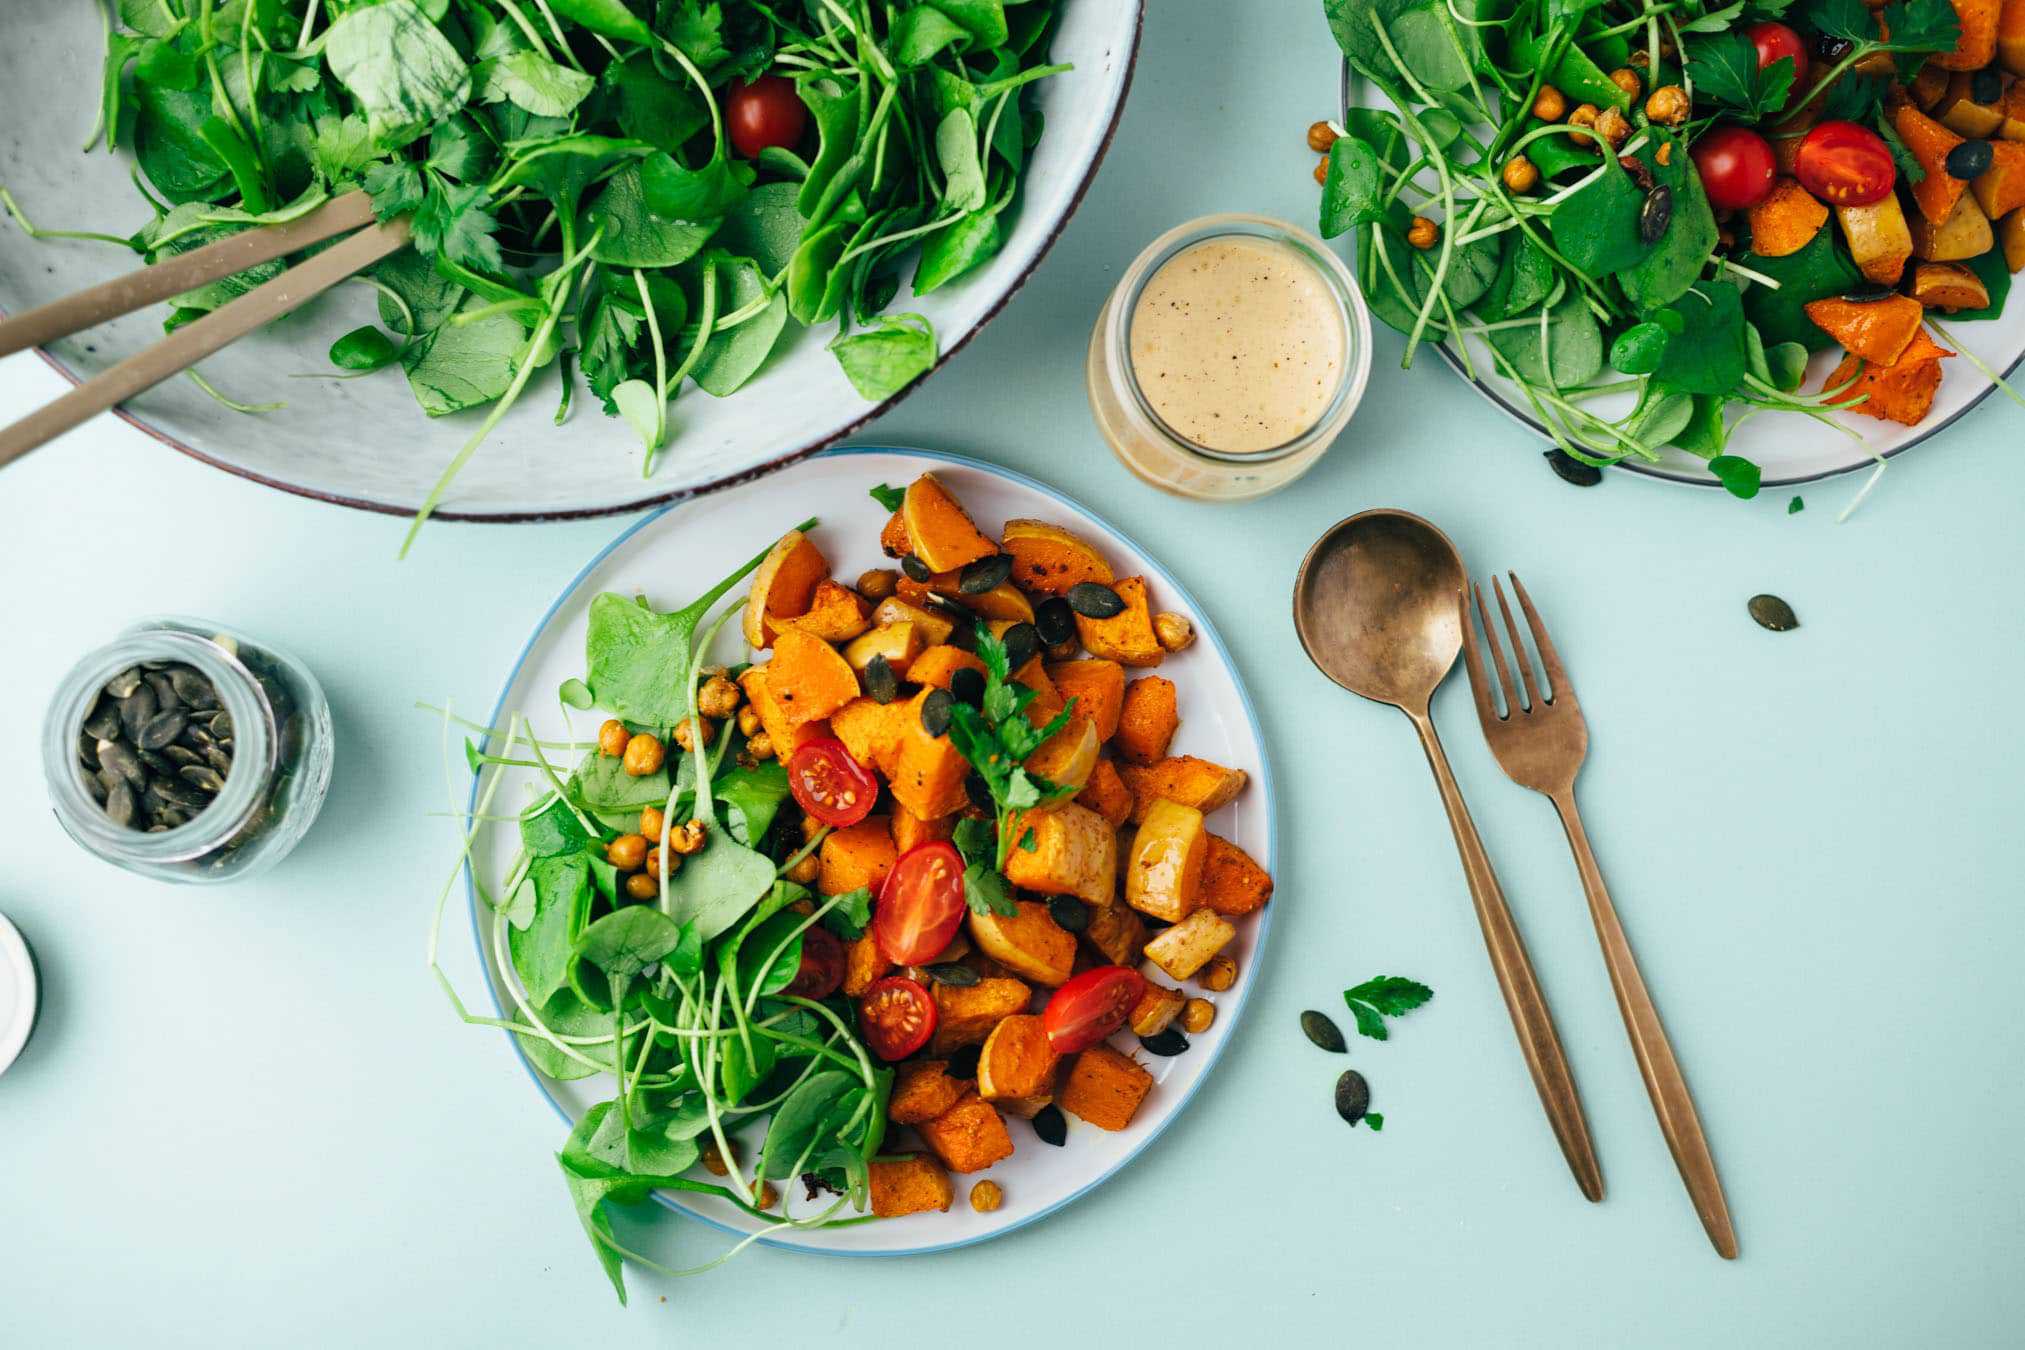 Salad with pumpkin, chickpeas and tahini dressing recipe